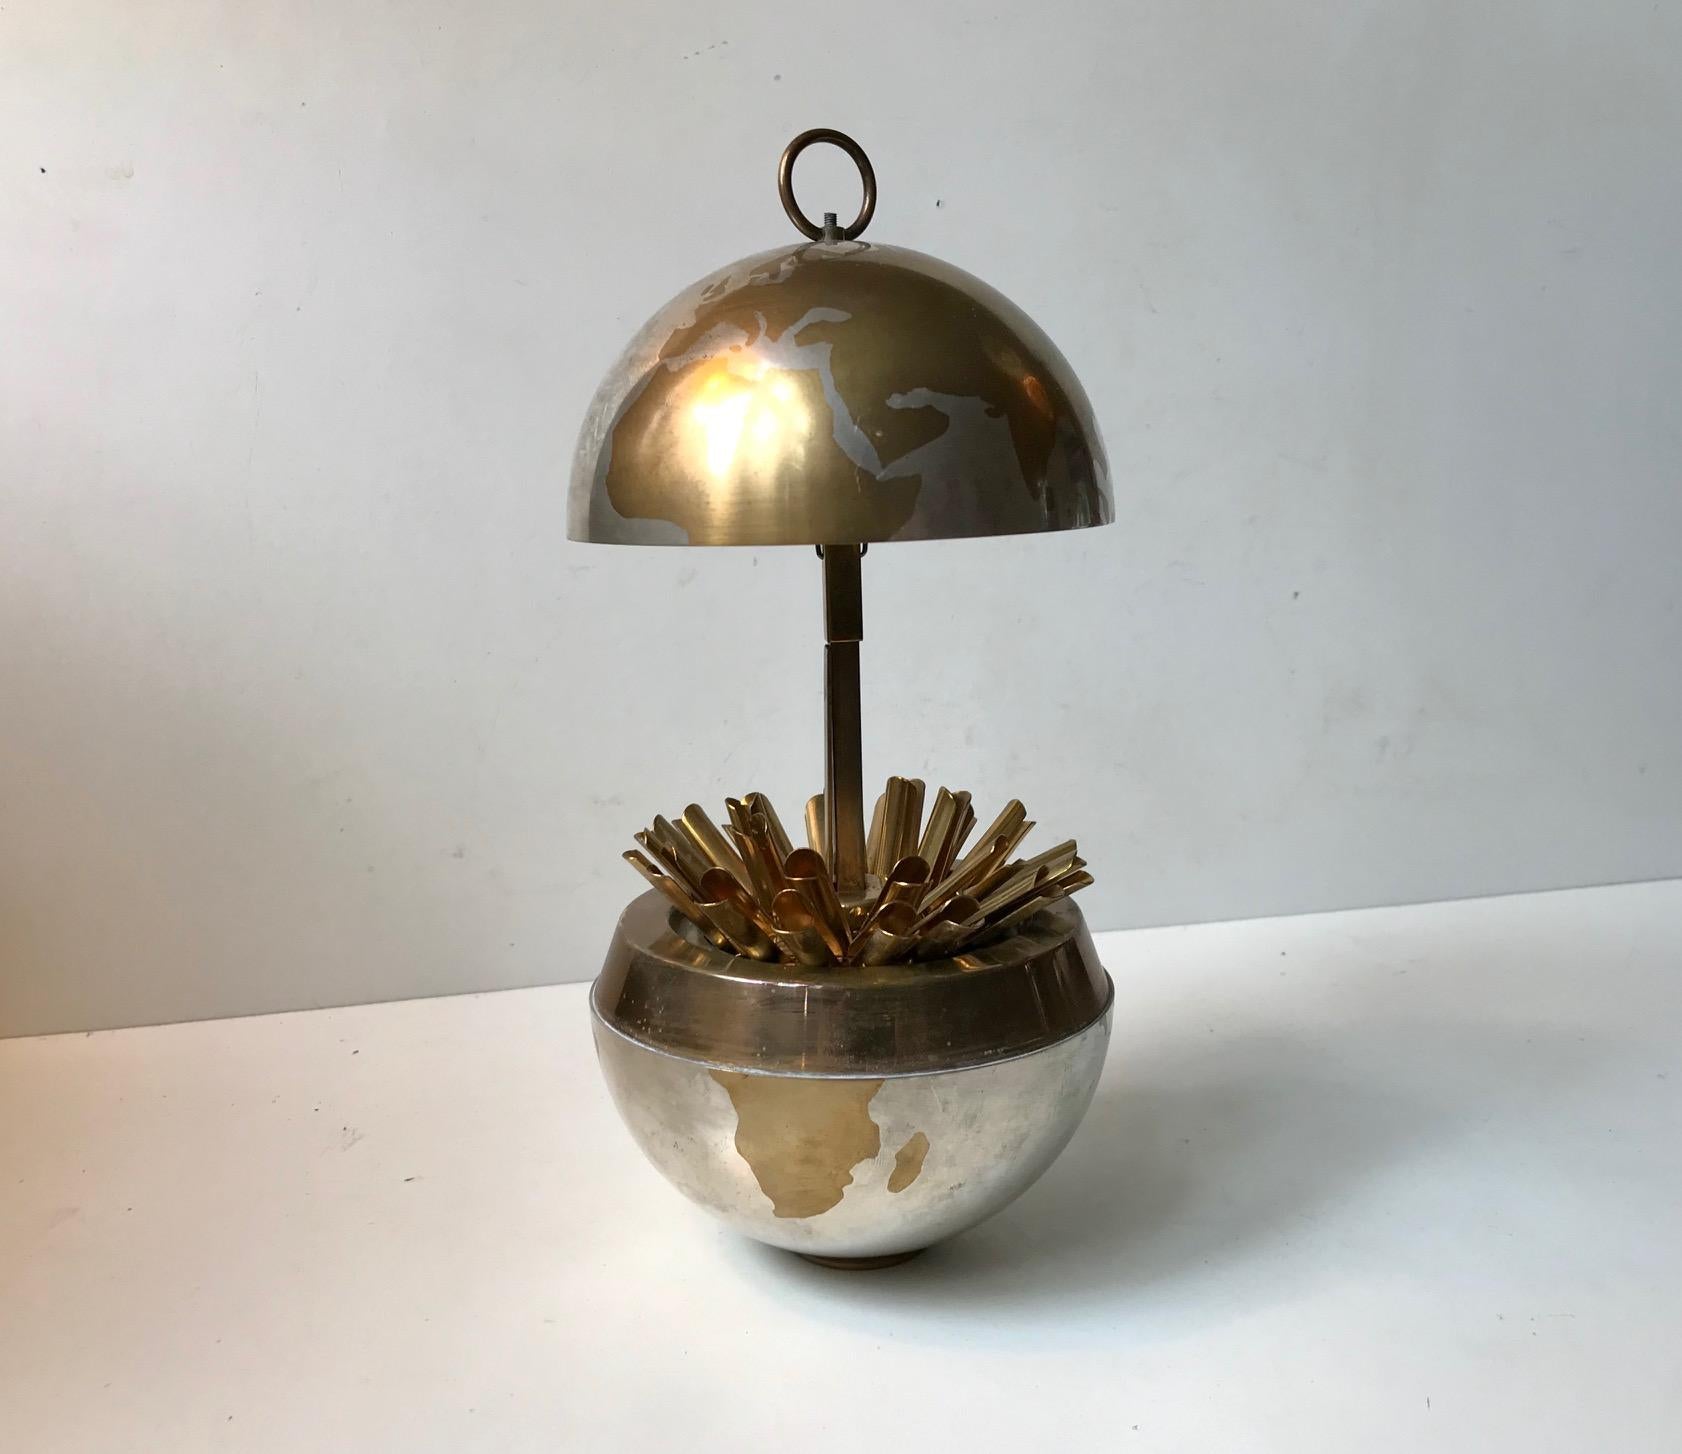 Authentic world globe cigarette dispenser popularized in Germany during the 1930s. This example is also German and dates from the 1950s. It can contain 25 cigarettes that spreads out almost like a flower when opened. The interior mechanism is tight